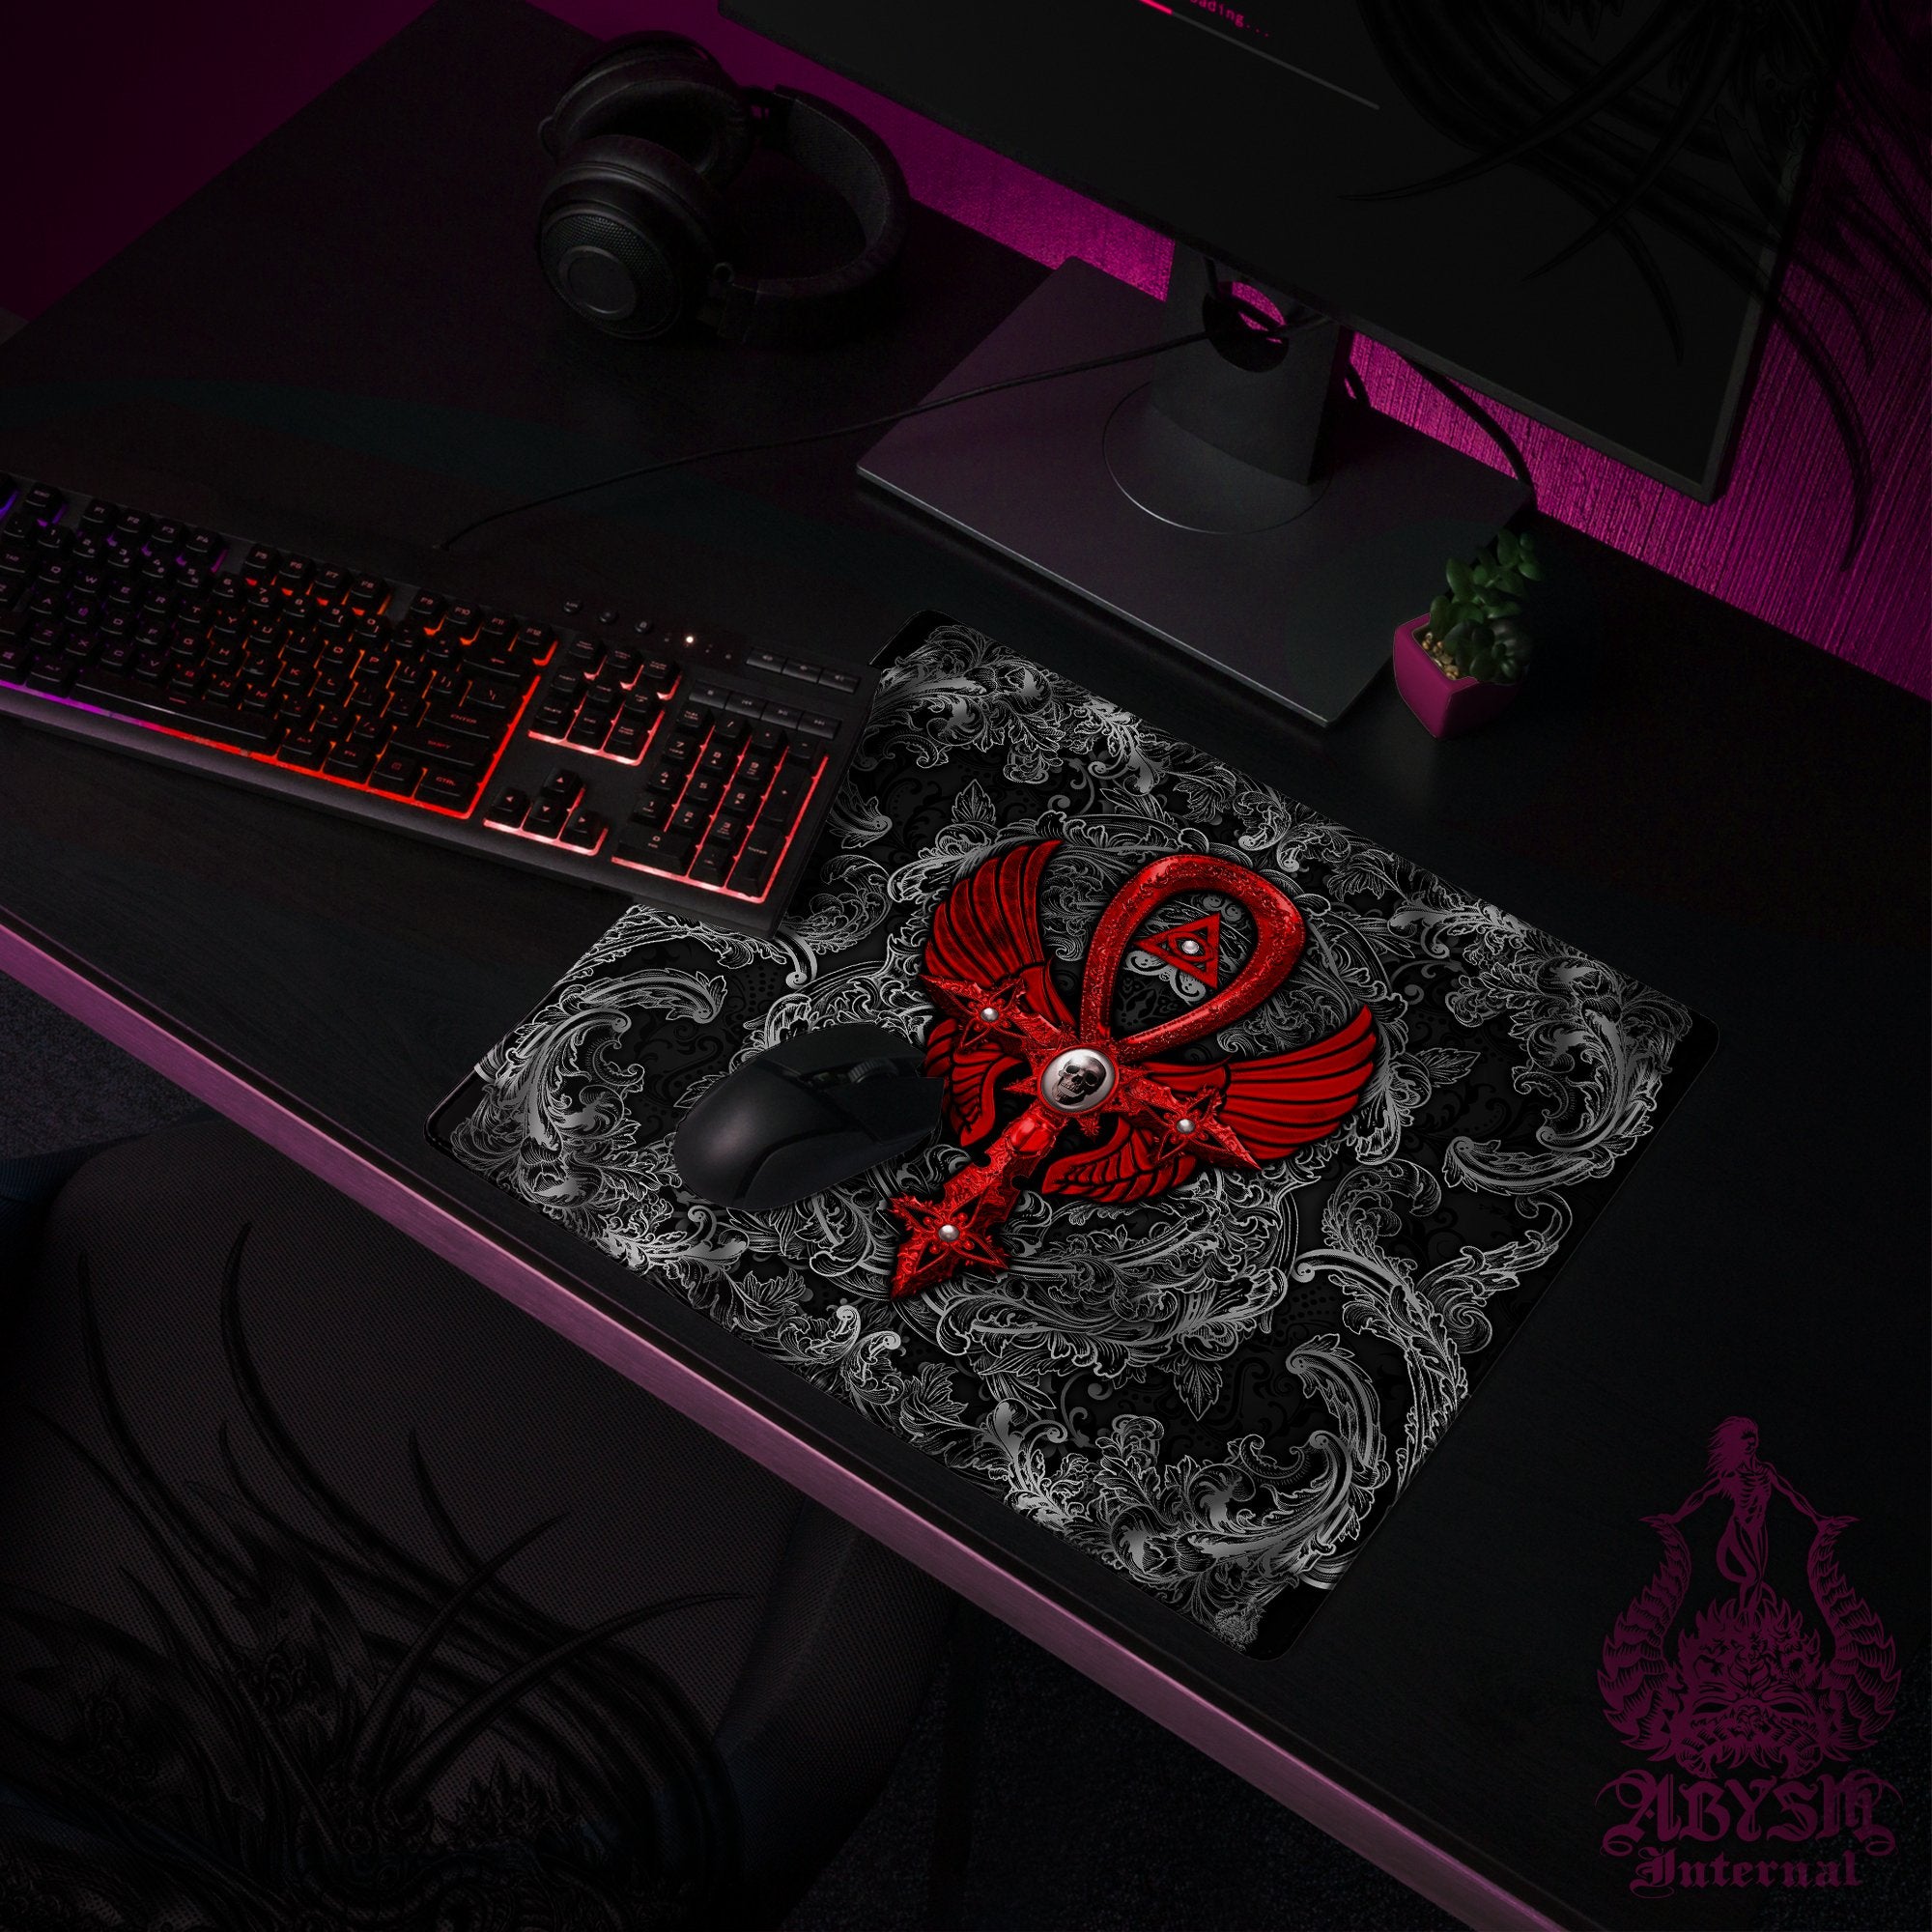 Dark Gaming Mouse Pad, Gothic Desk Mat, Black Table Protector Cover, Goth Ankh Workpad, Skull Cross Art Print - 3 Colors - Abysm Internal